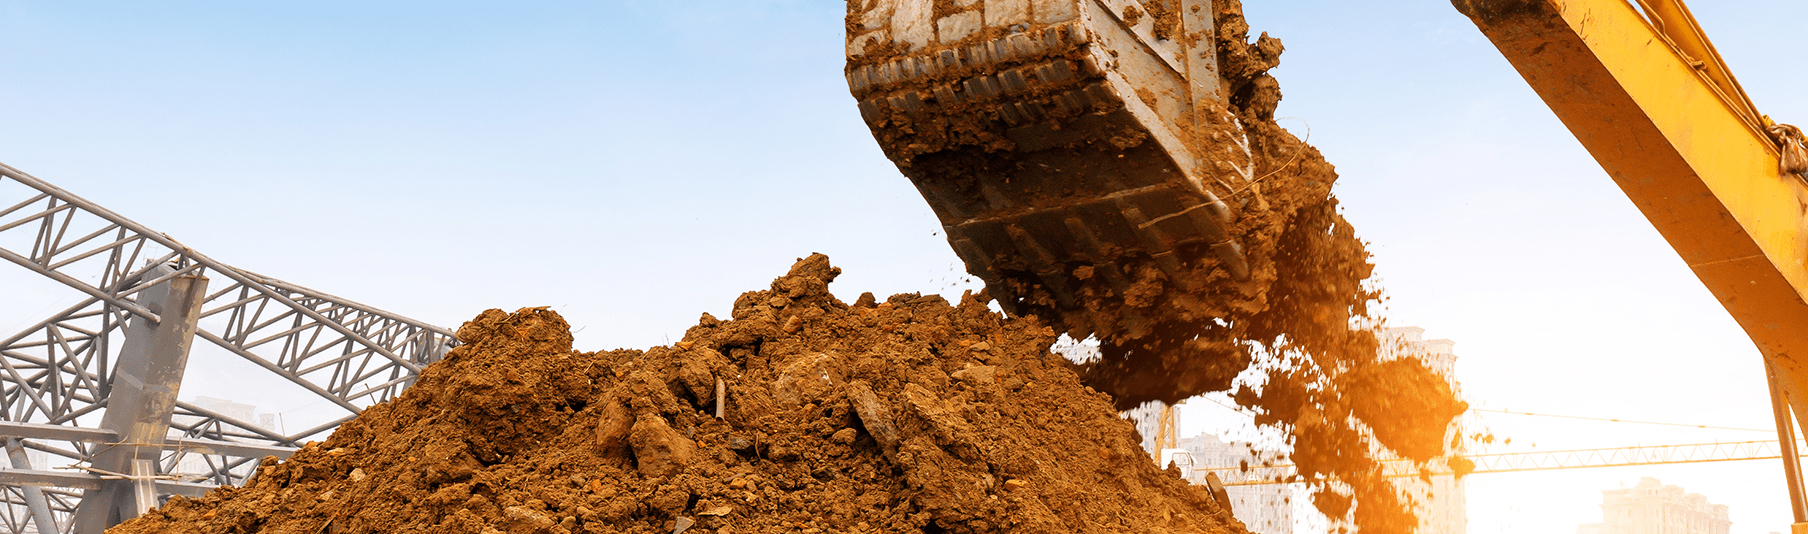 Construction Insurance: A large pile of dirt being scooped up by a bulldozer